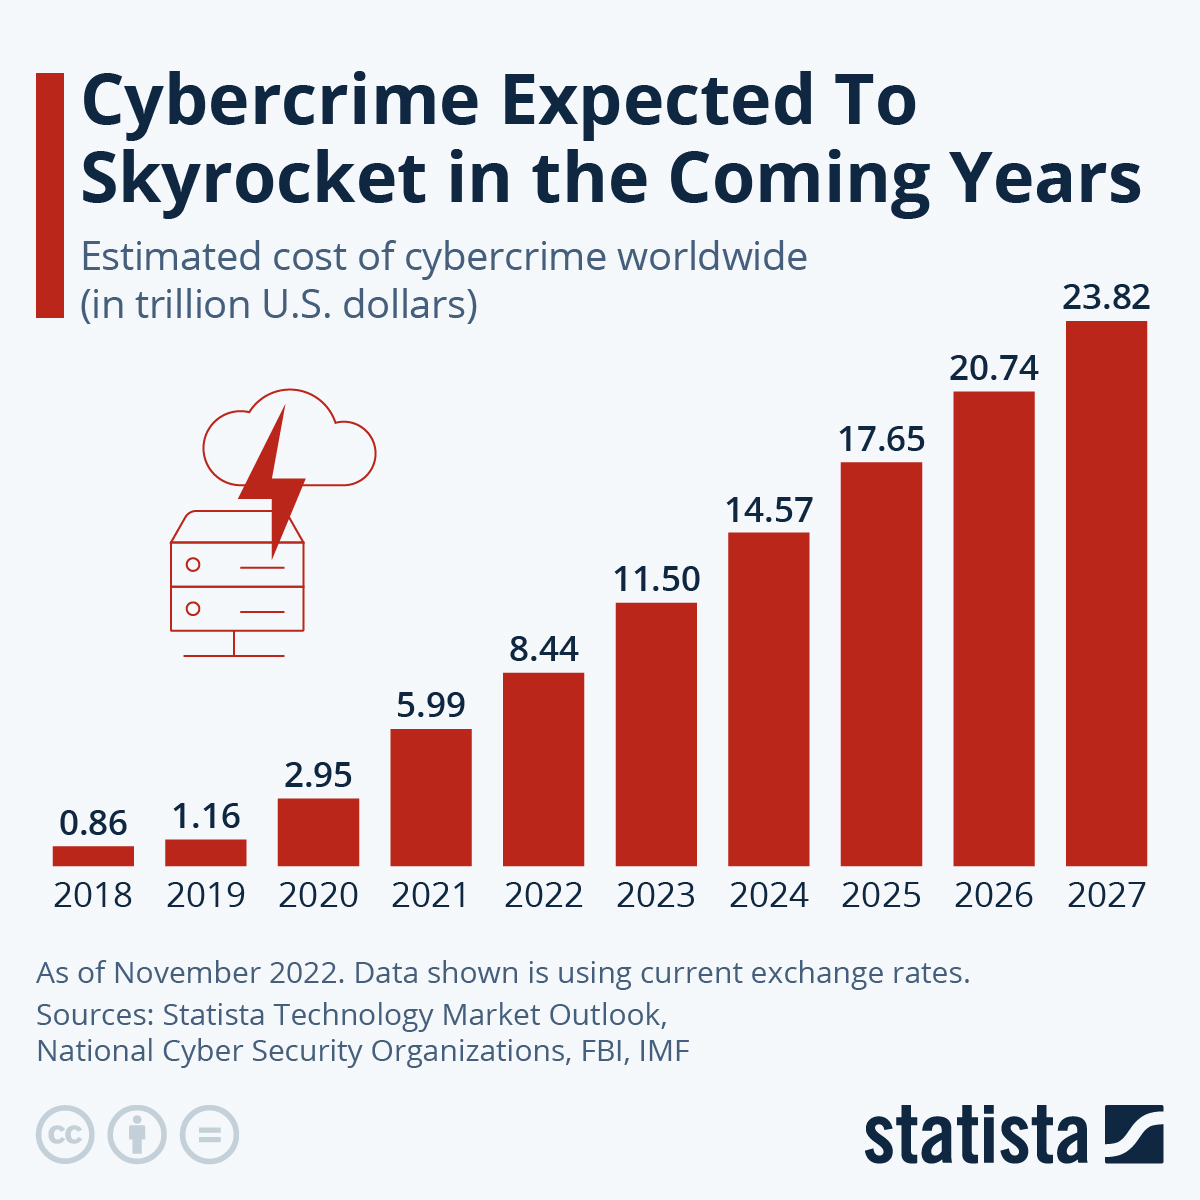 expected cost of cybercrime until 2027